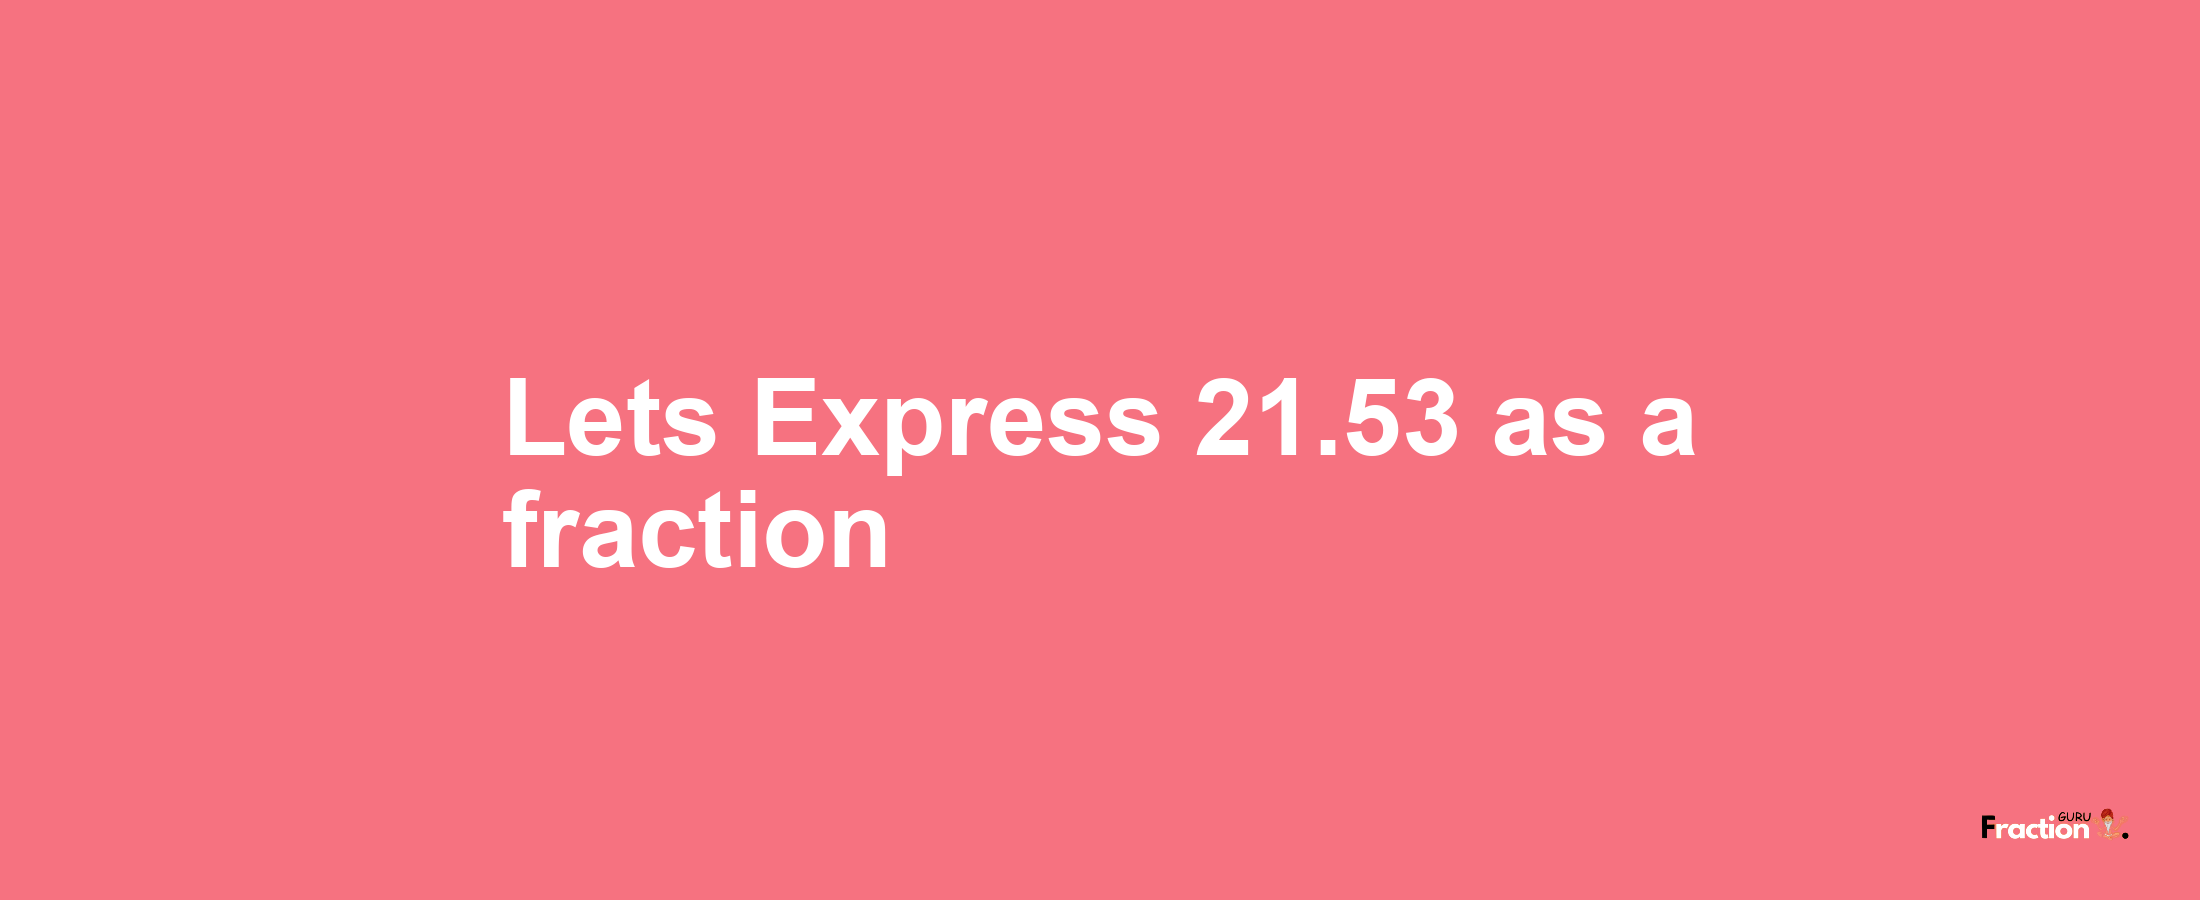 Lets Express 21.53 as afraction